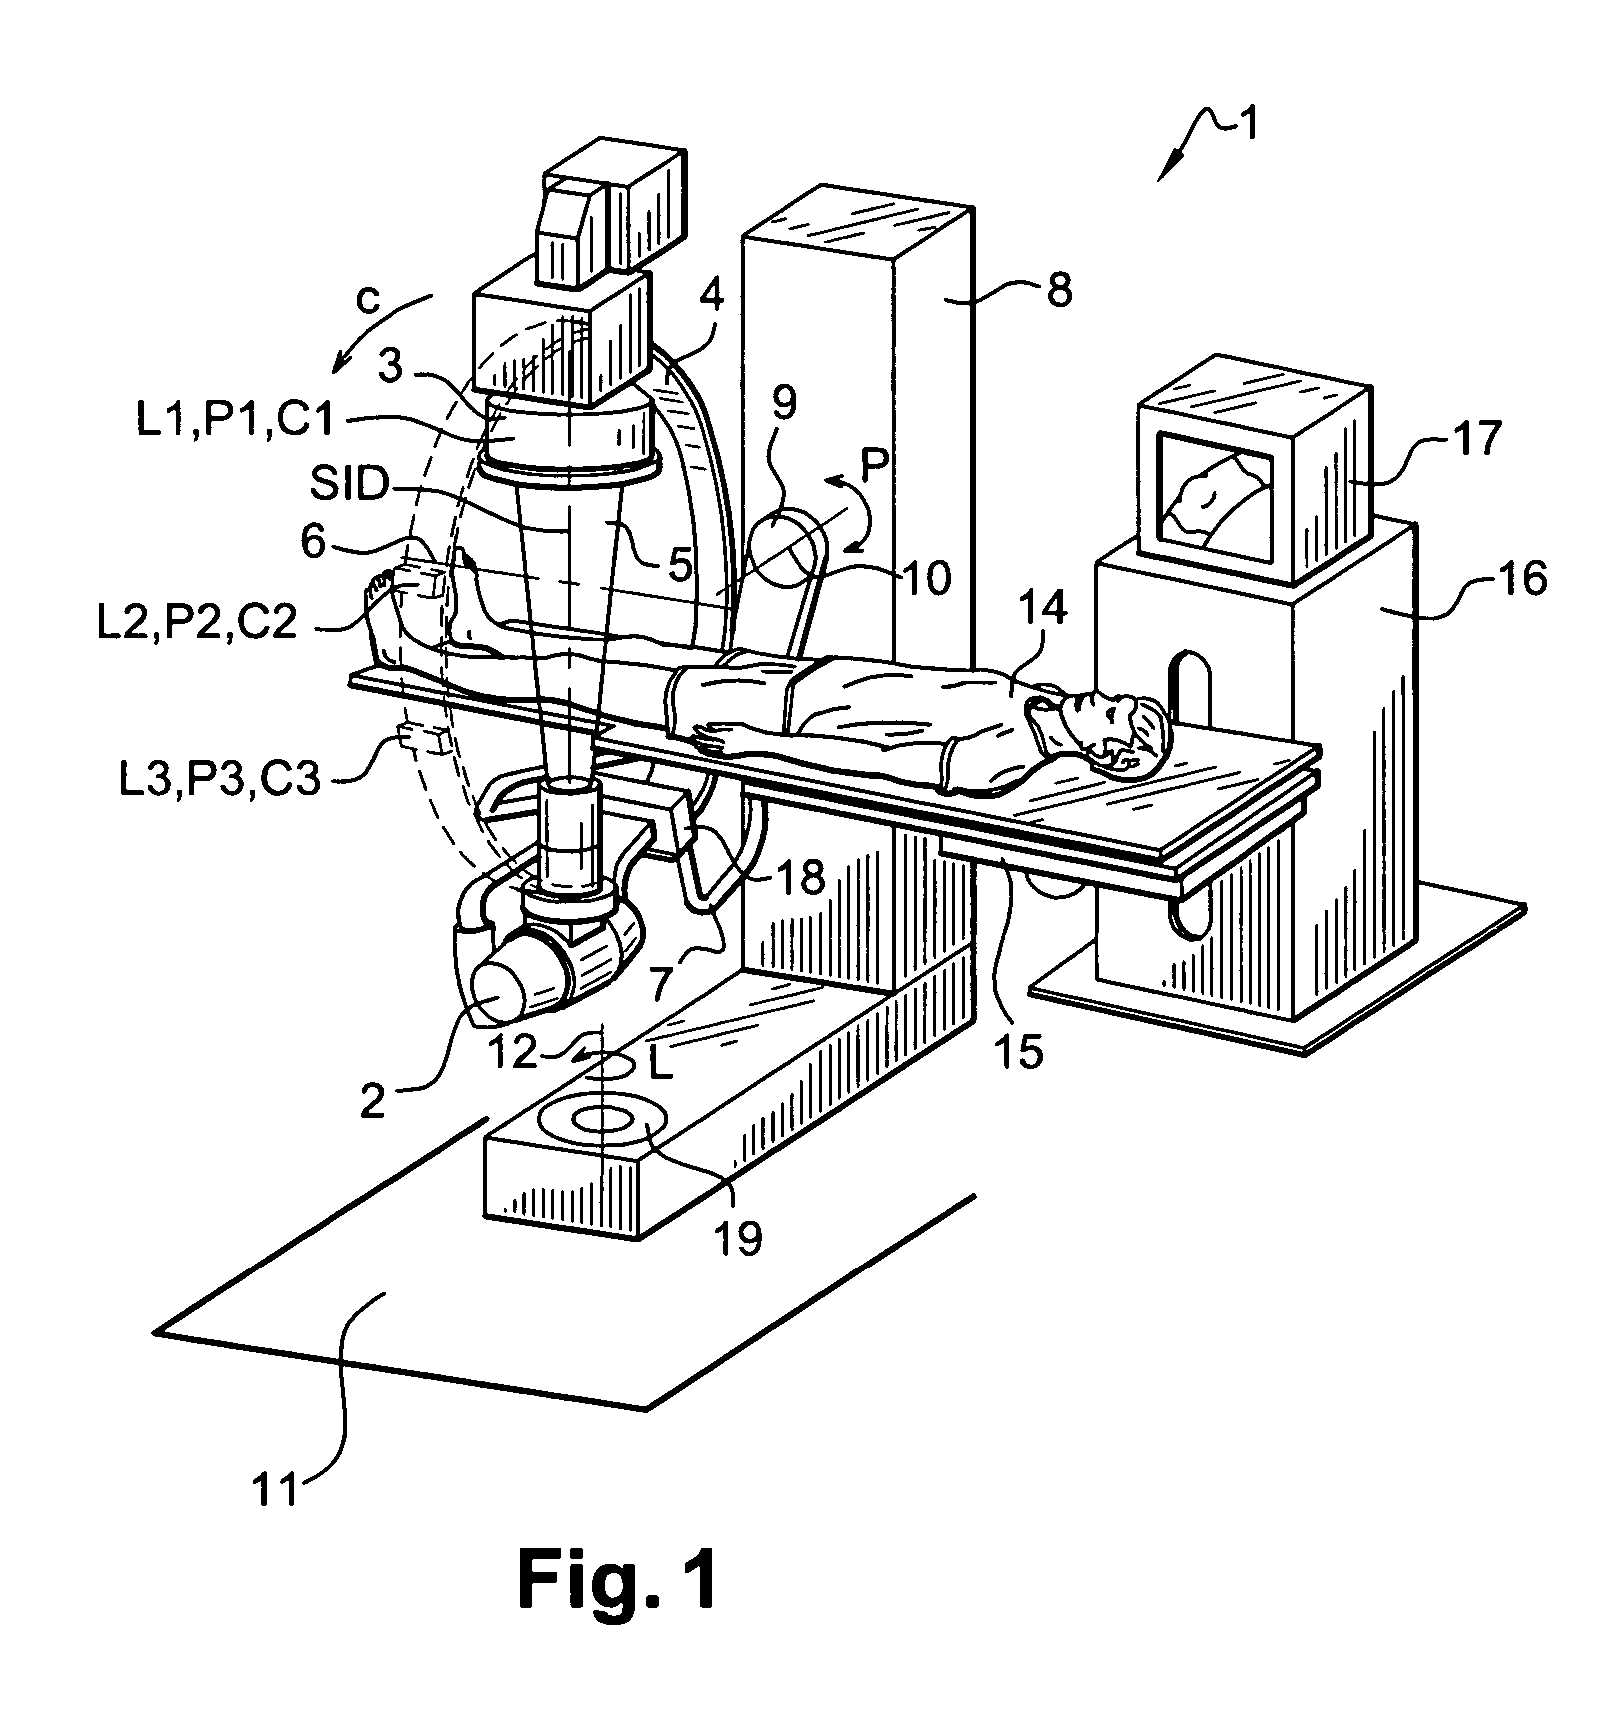 Method and apparatus for acquisition geometry of an imaging system